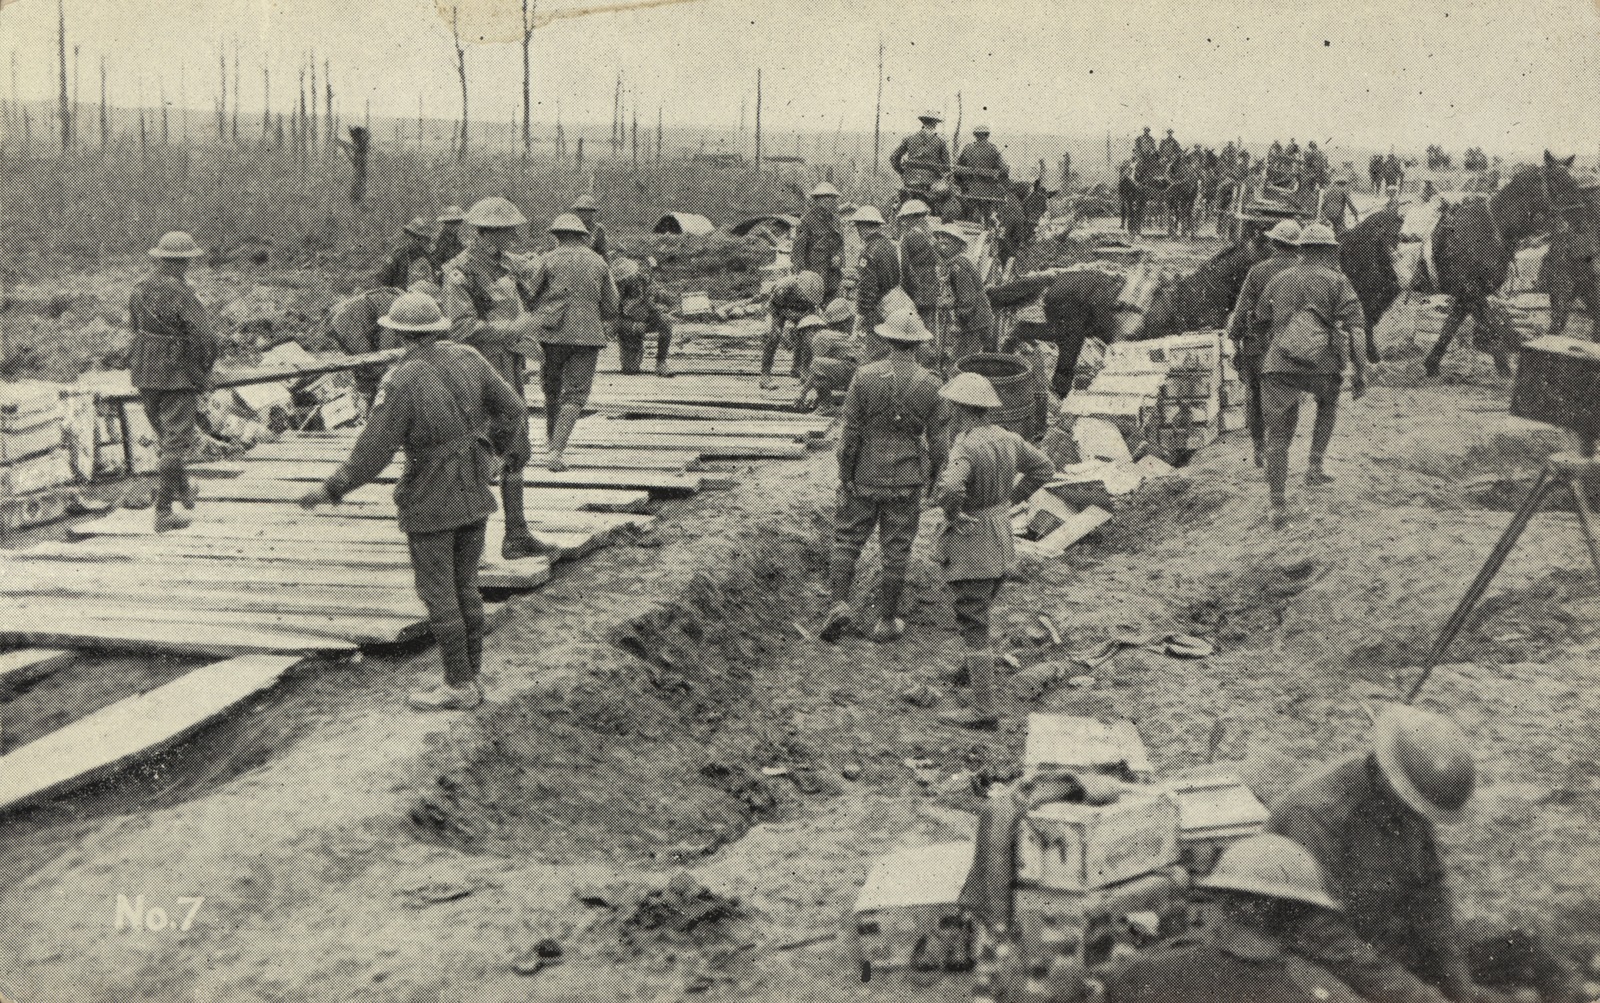 Australian soldiers construct a roadway while the battle goes on, ca. 1917